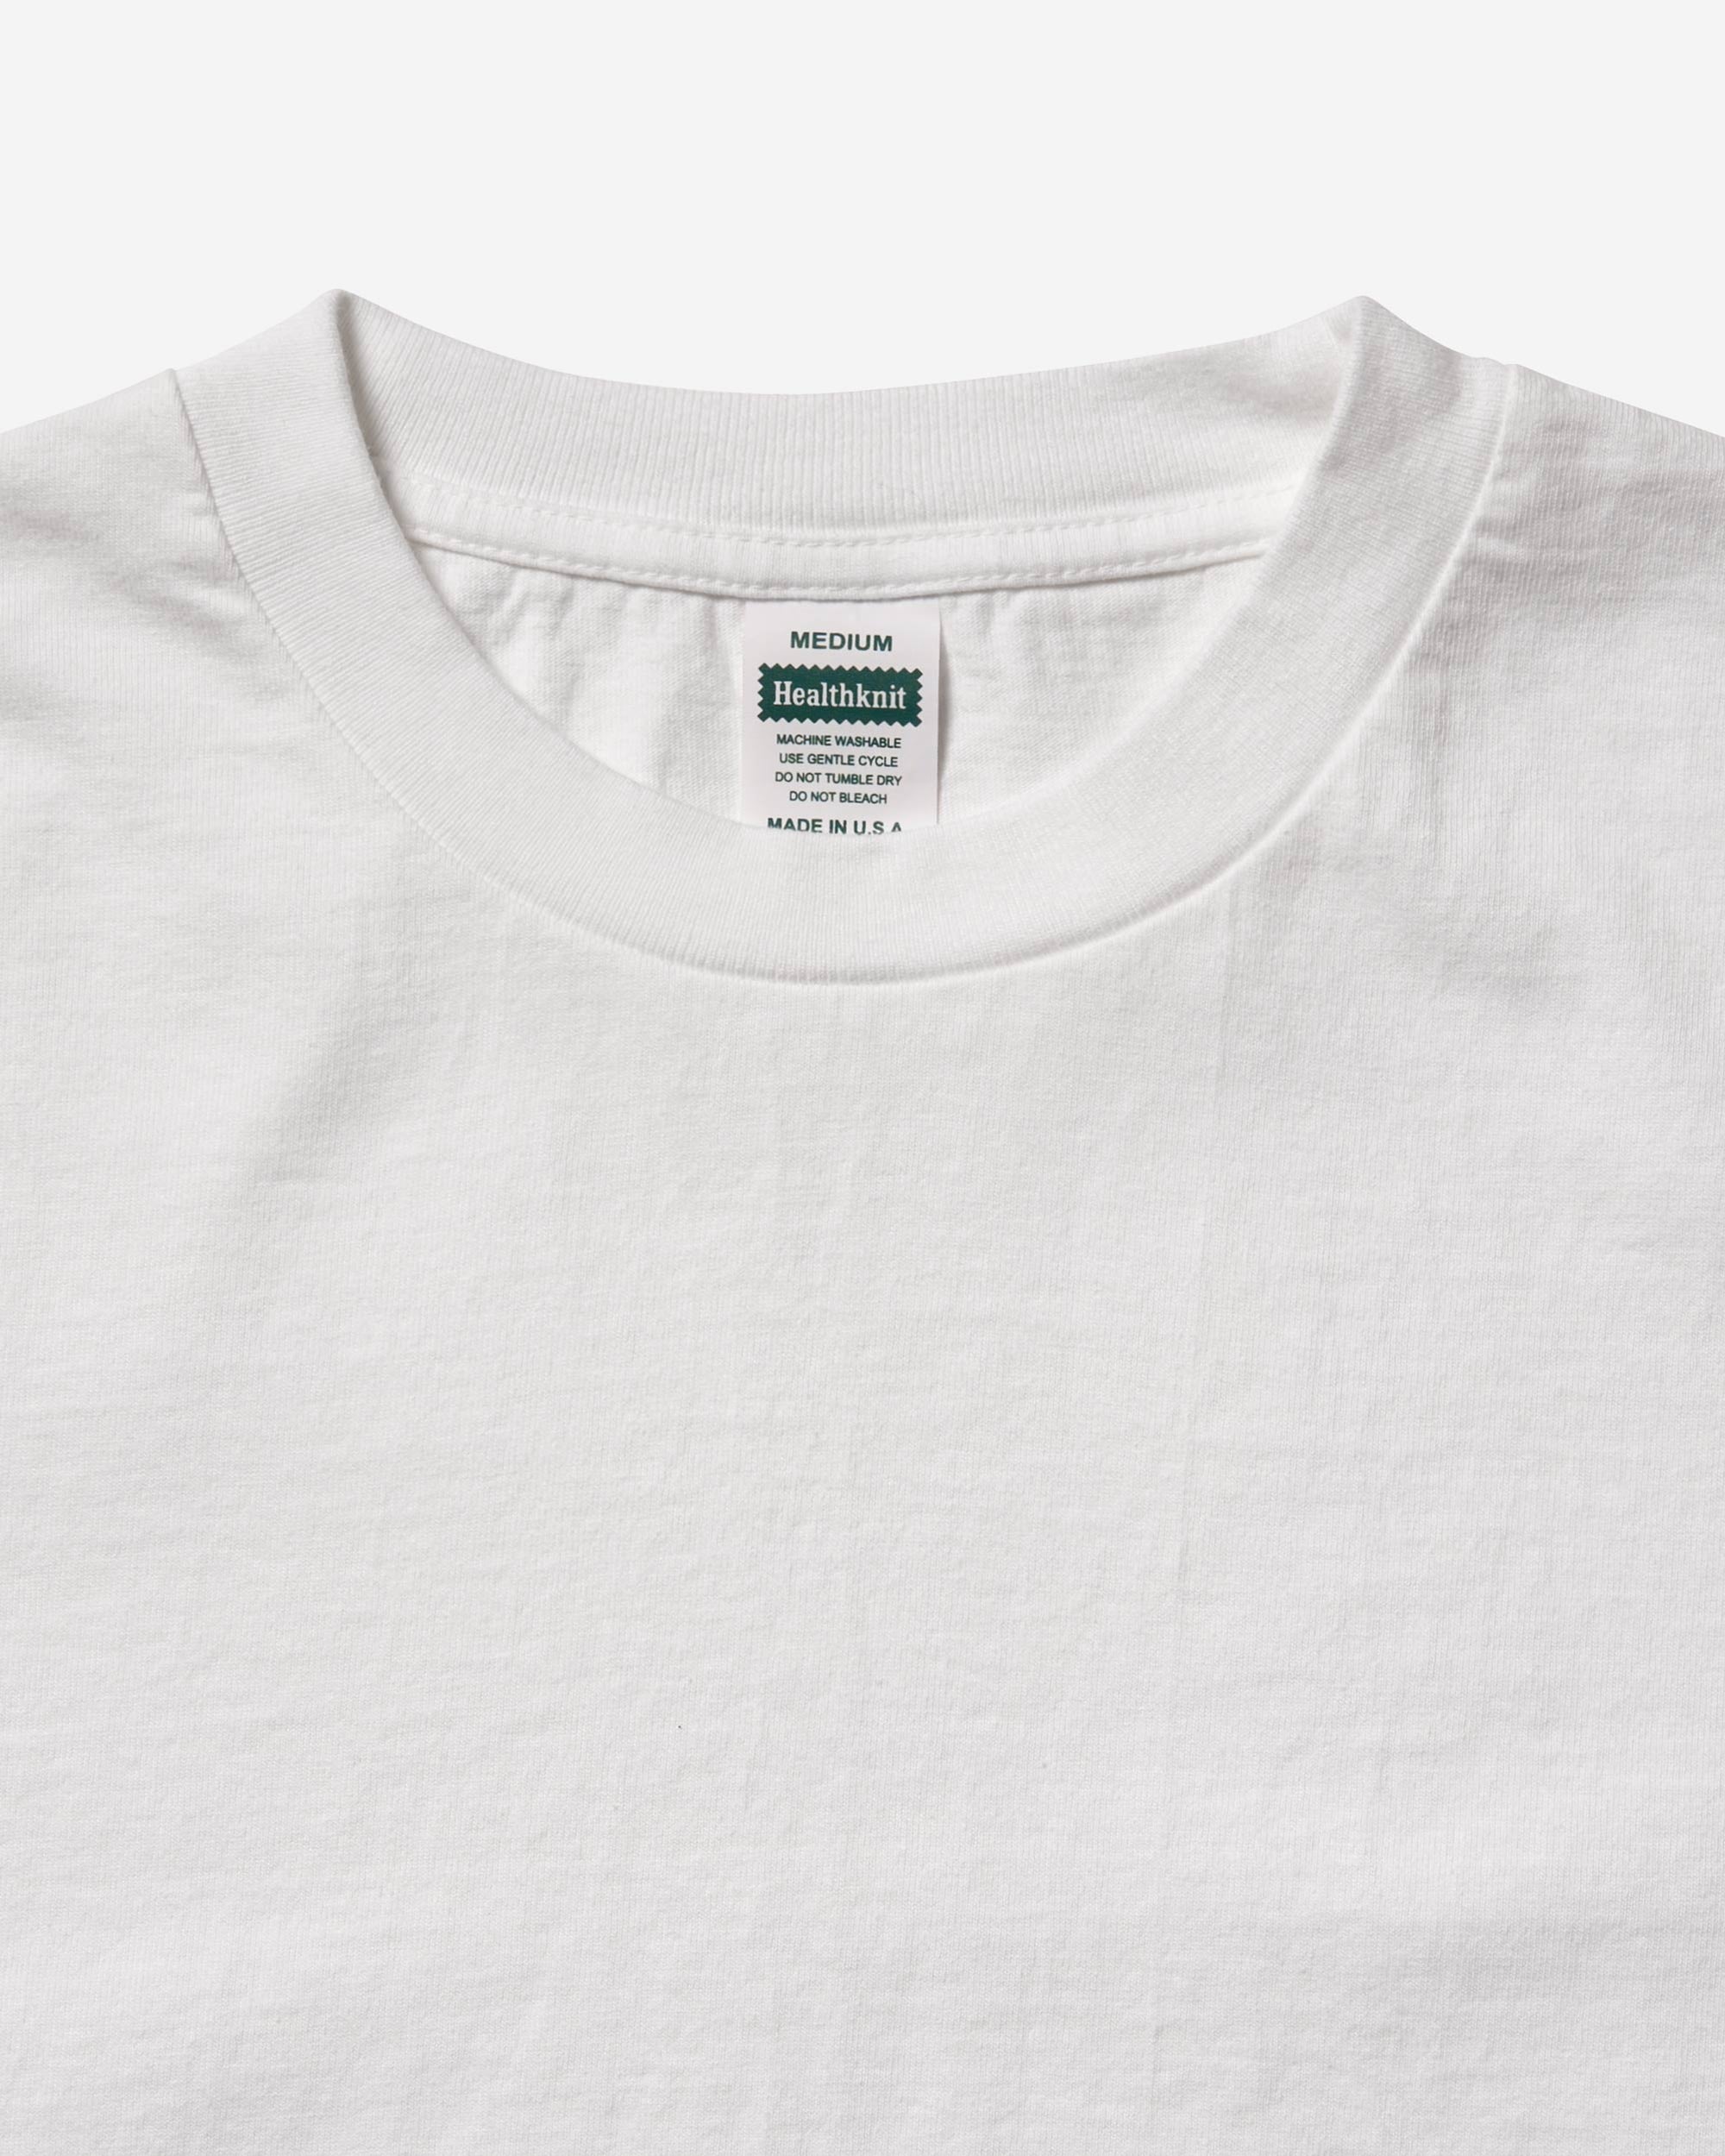 Made in USA Crew Neck S/S T-Shirt - White